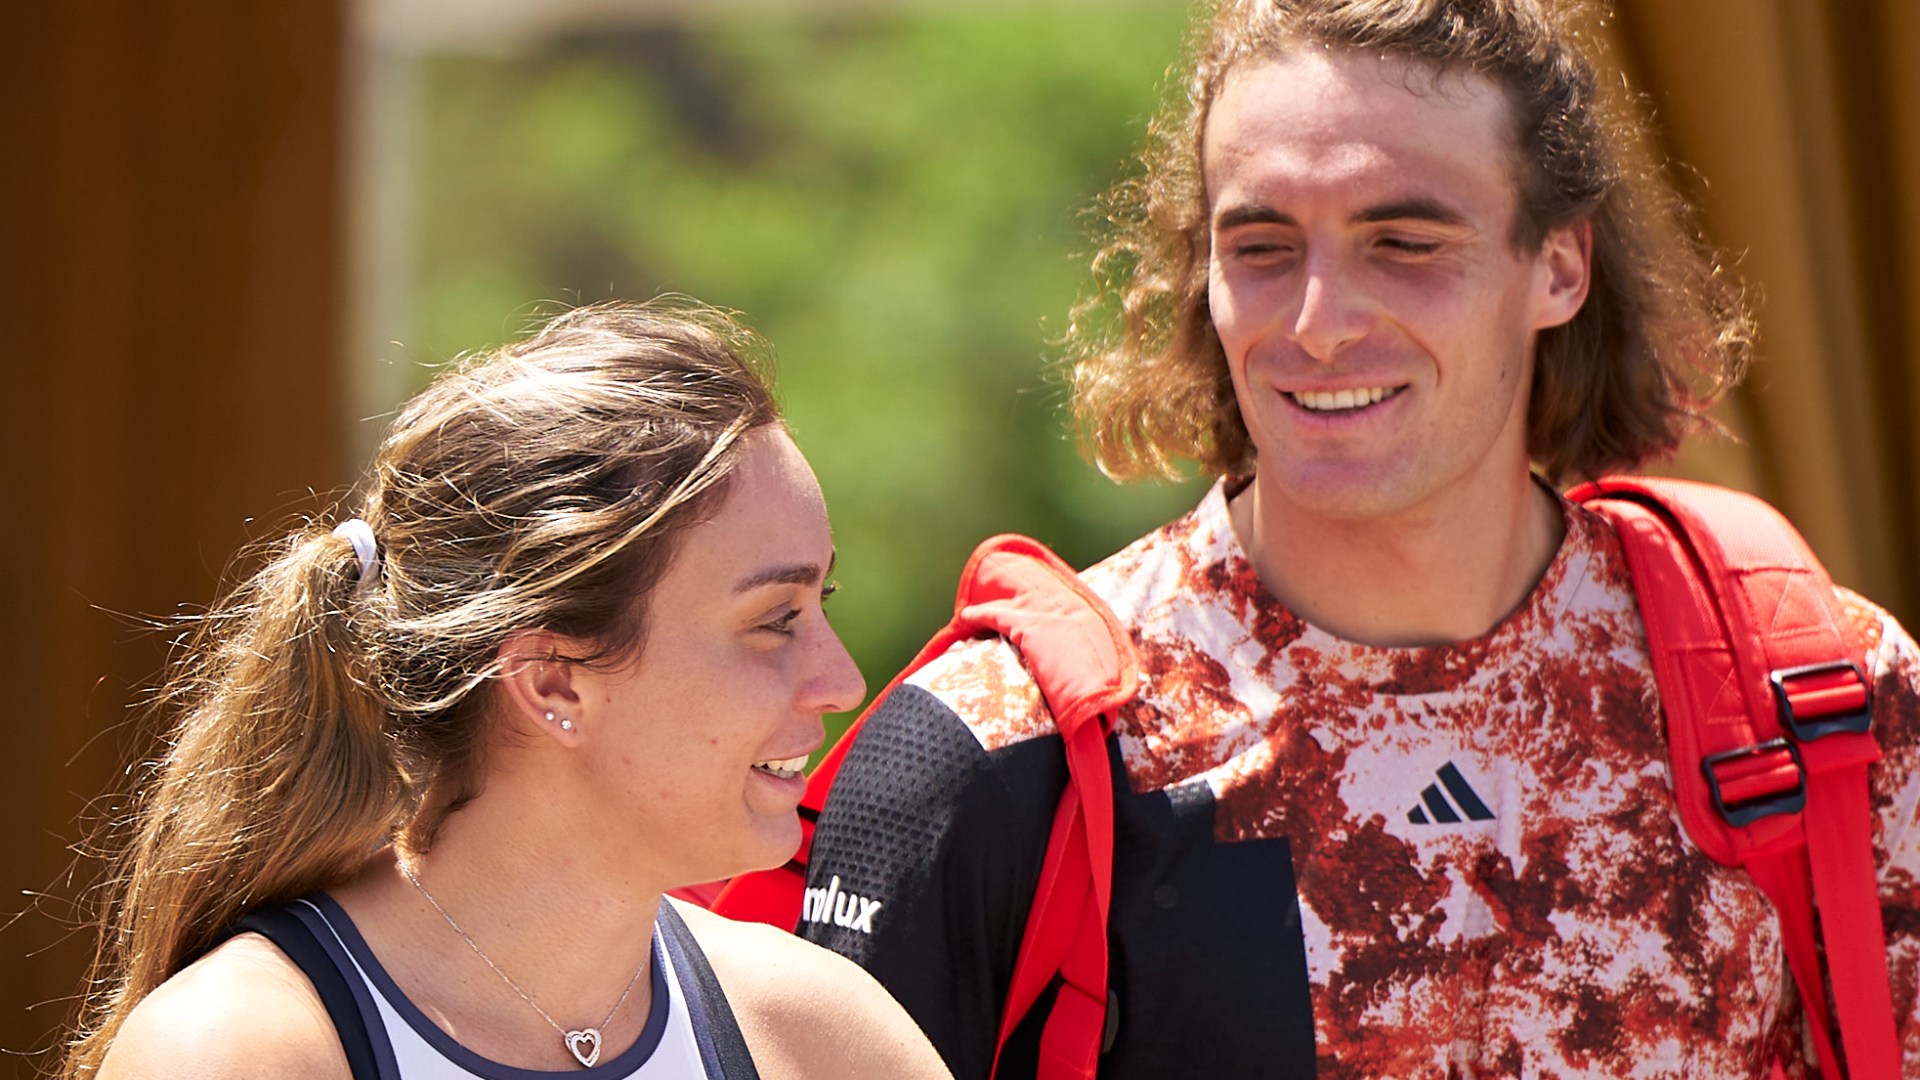 Tennis Stars Tsitsipas and Badosa End Their Match: A Love Settled in Privacy